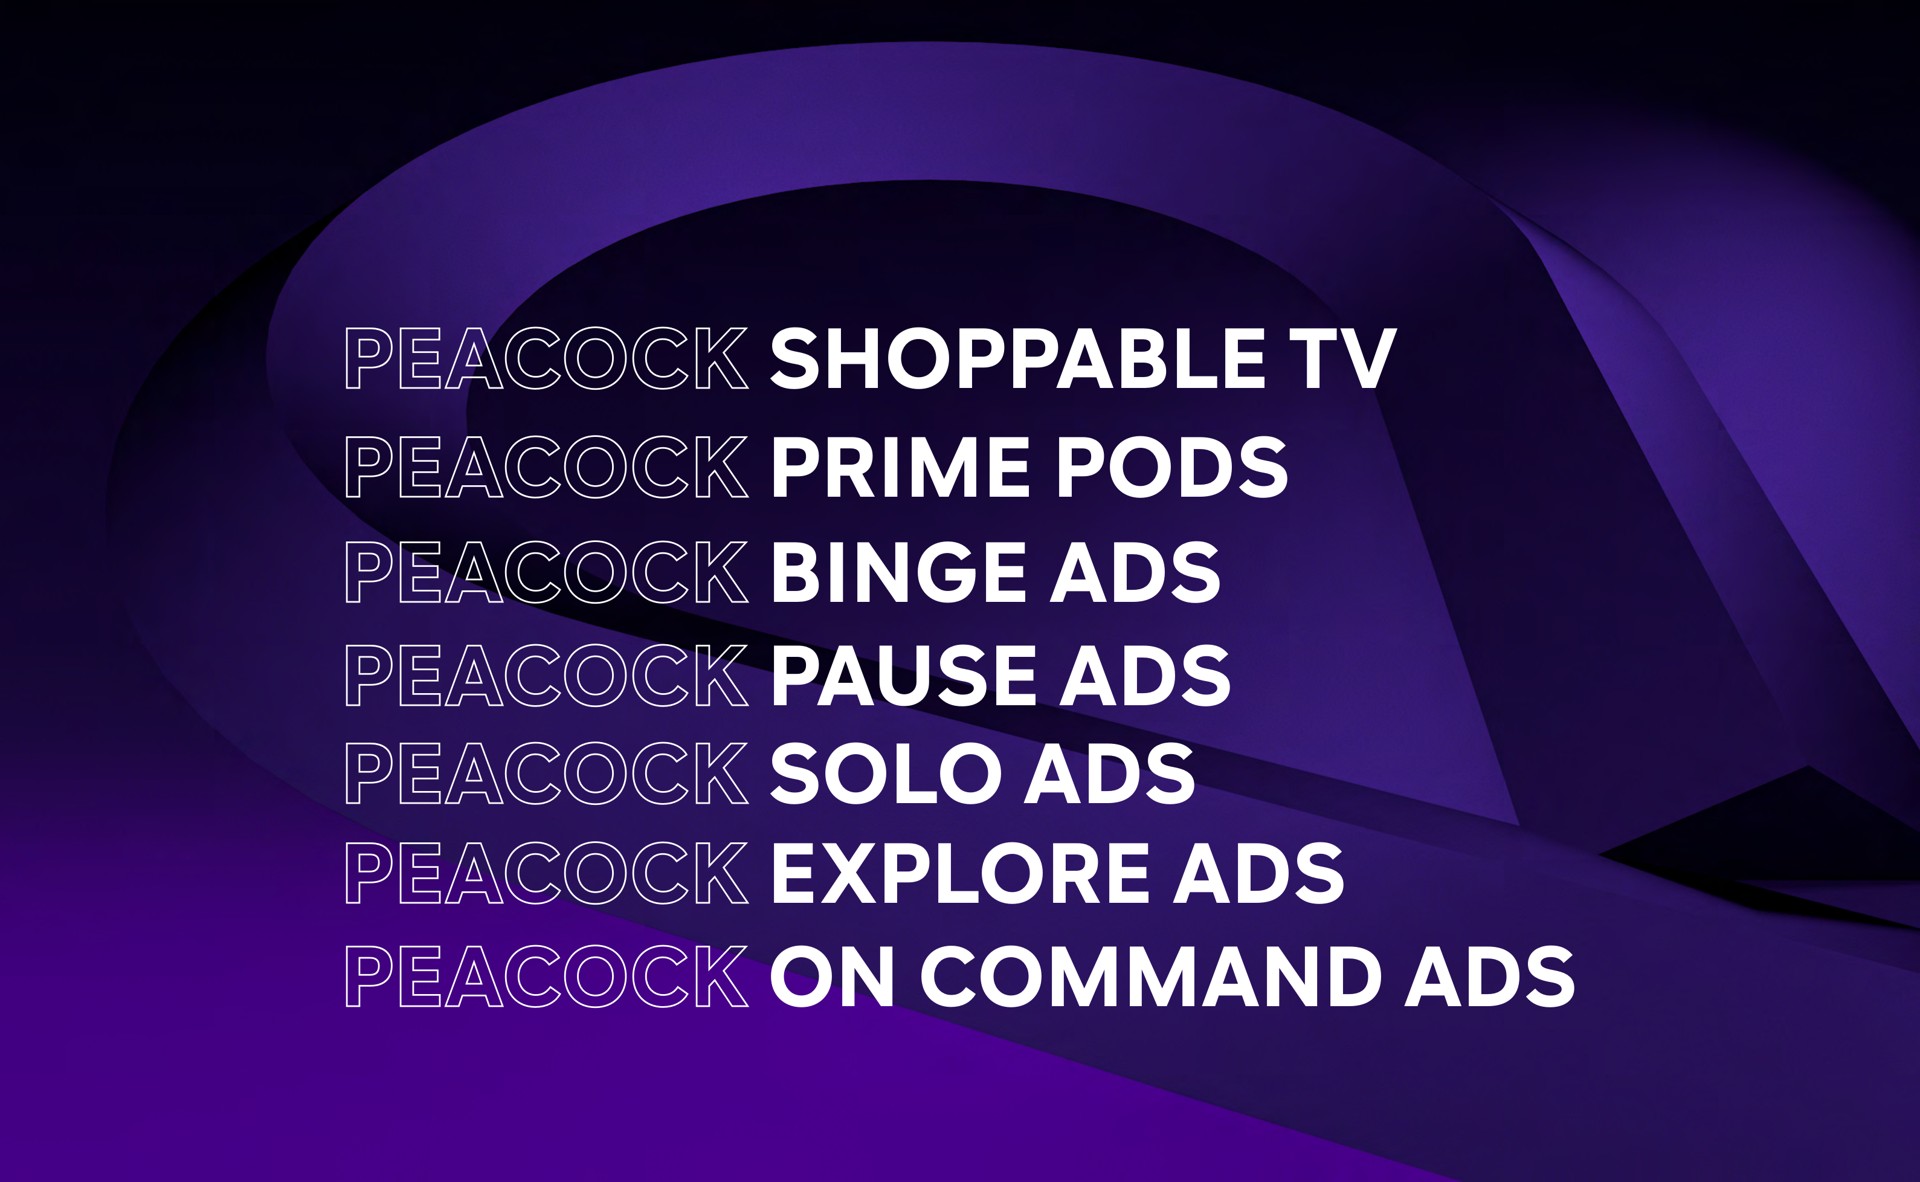 peacock peacock prime pods peacock binge ads peacock pause ads peacock solo ads peacock explore ads peacock on command ads | Comcast